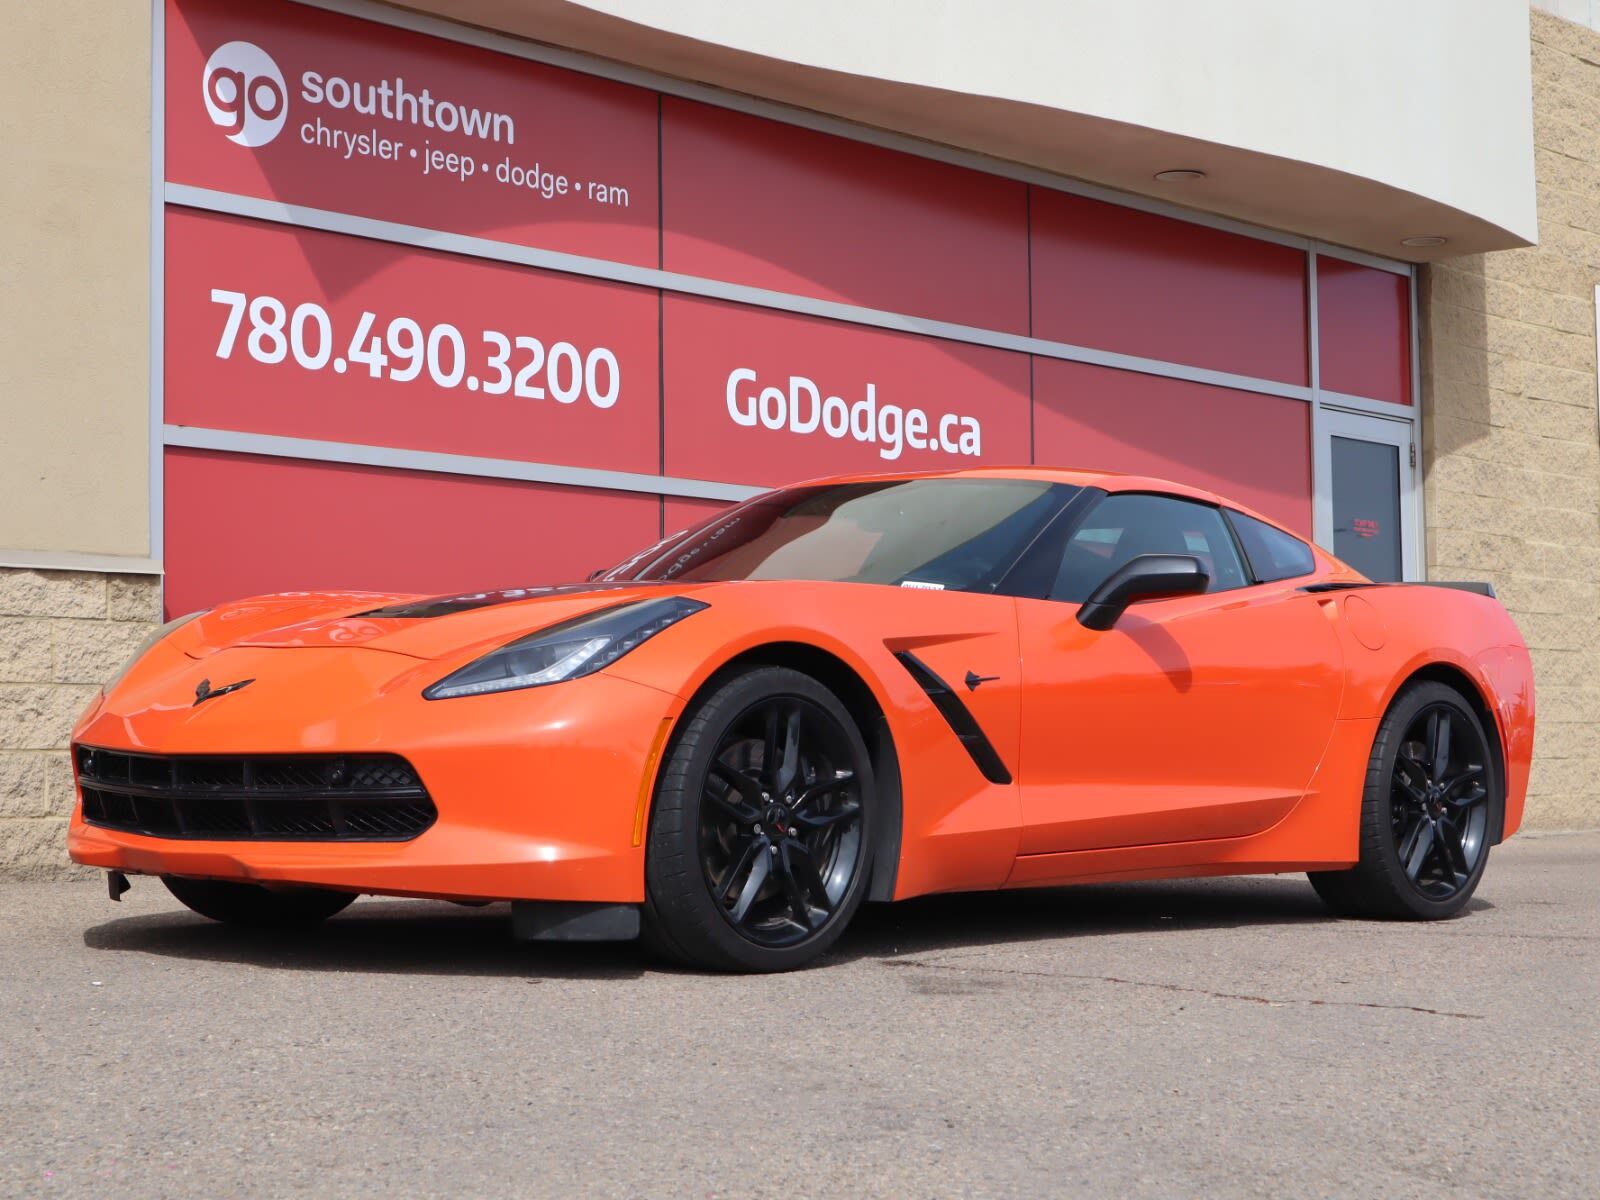 2019 Chevrolet Corvette  STINGRAY Z51 2LT IN ORANGE EQUIPPED WITH A 460HP 